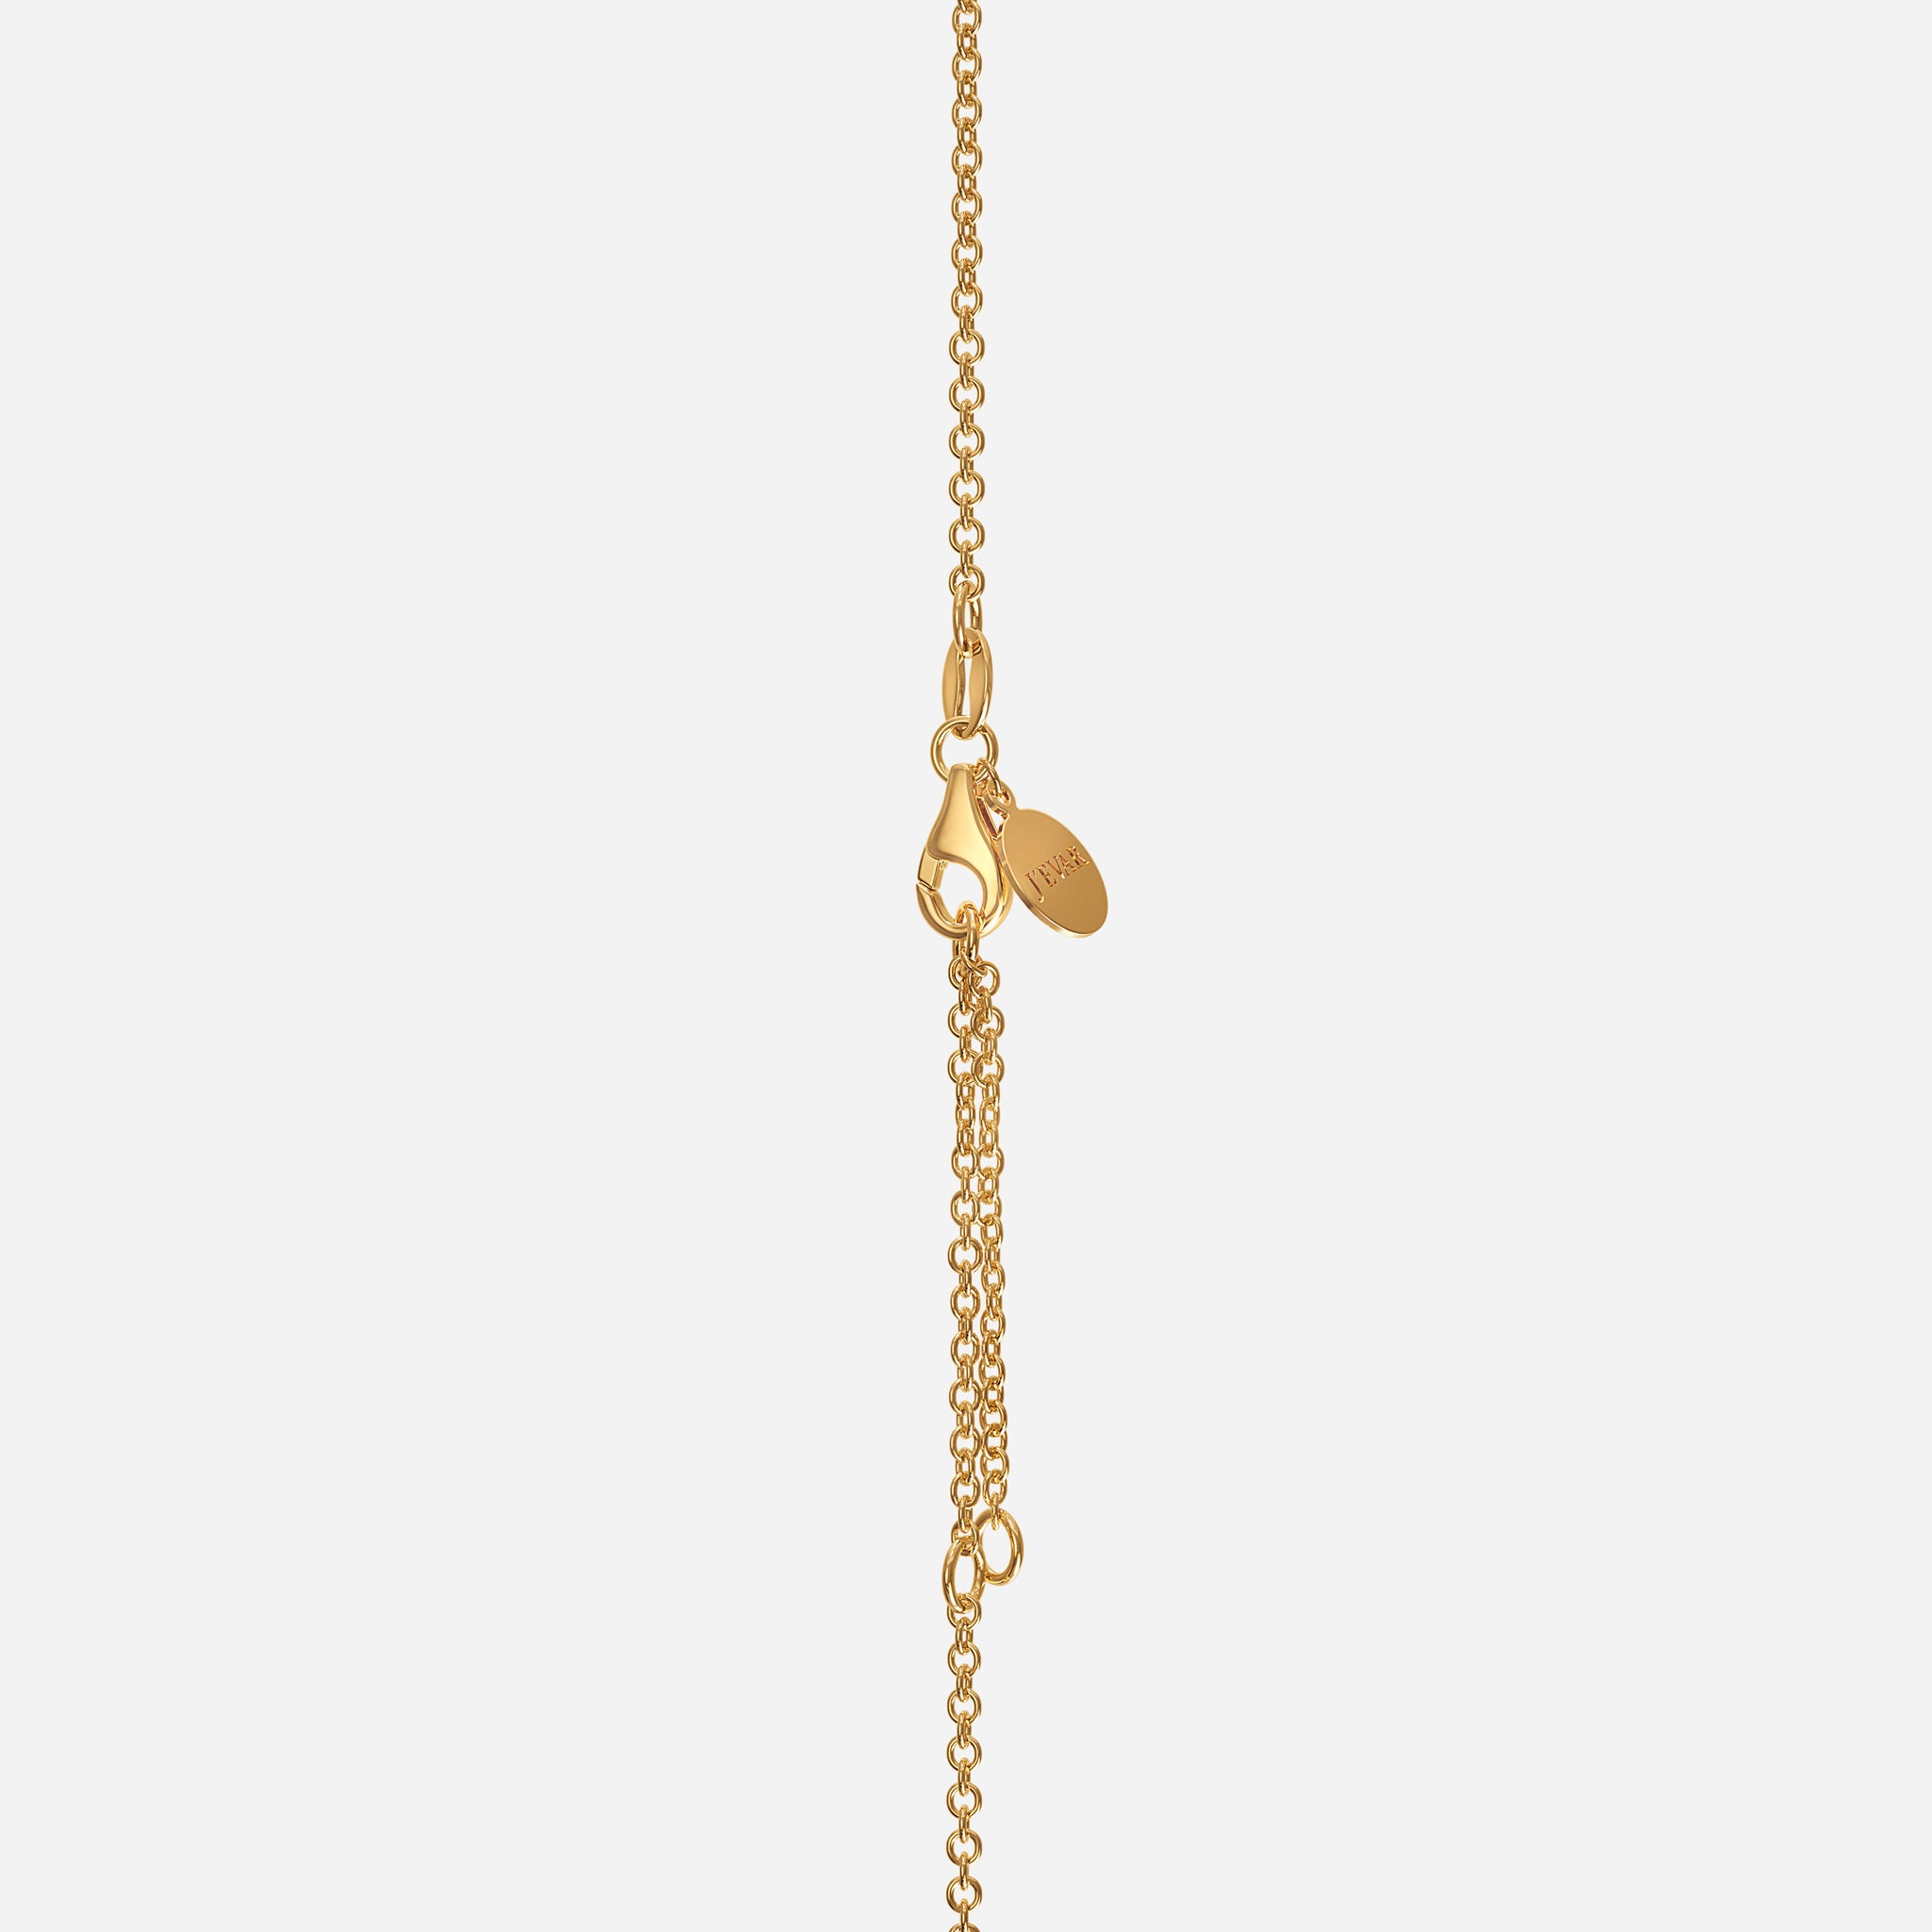 J'EVAR 14KT Yellow Gold Double-Layered Lariat ALTR Lab Grown Diamond Necklace Lock View